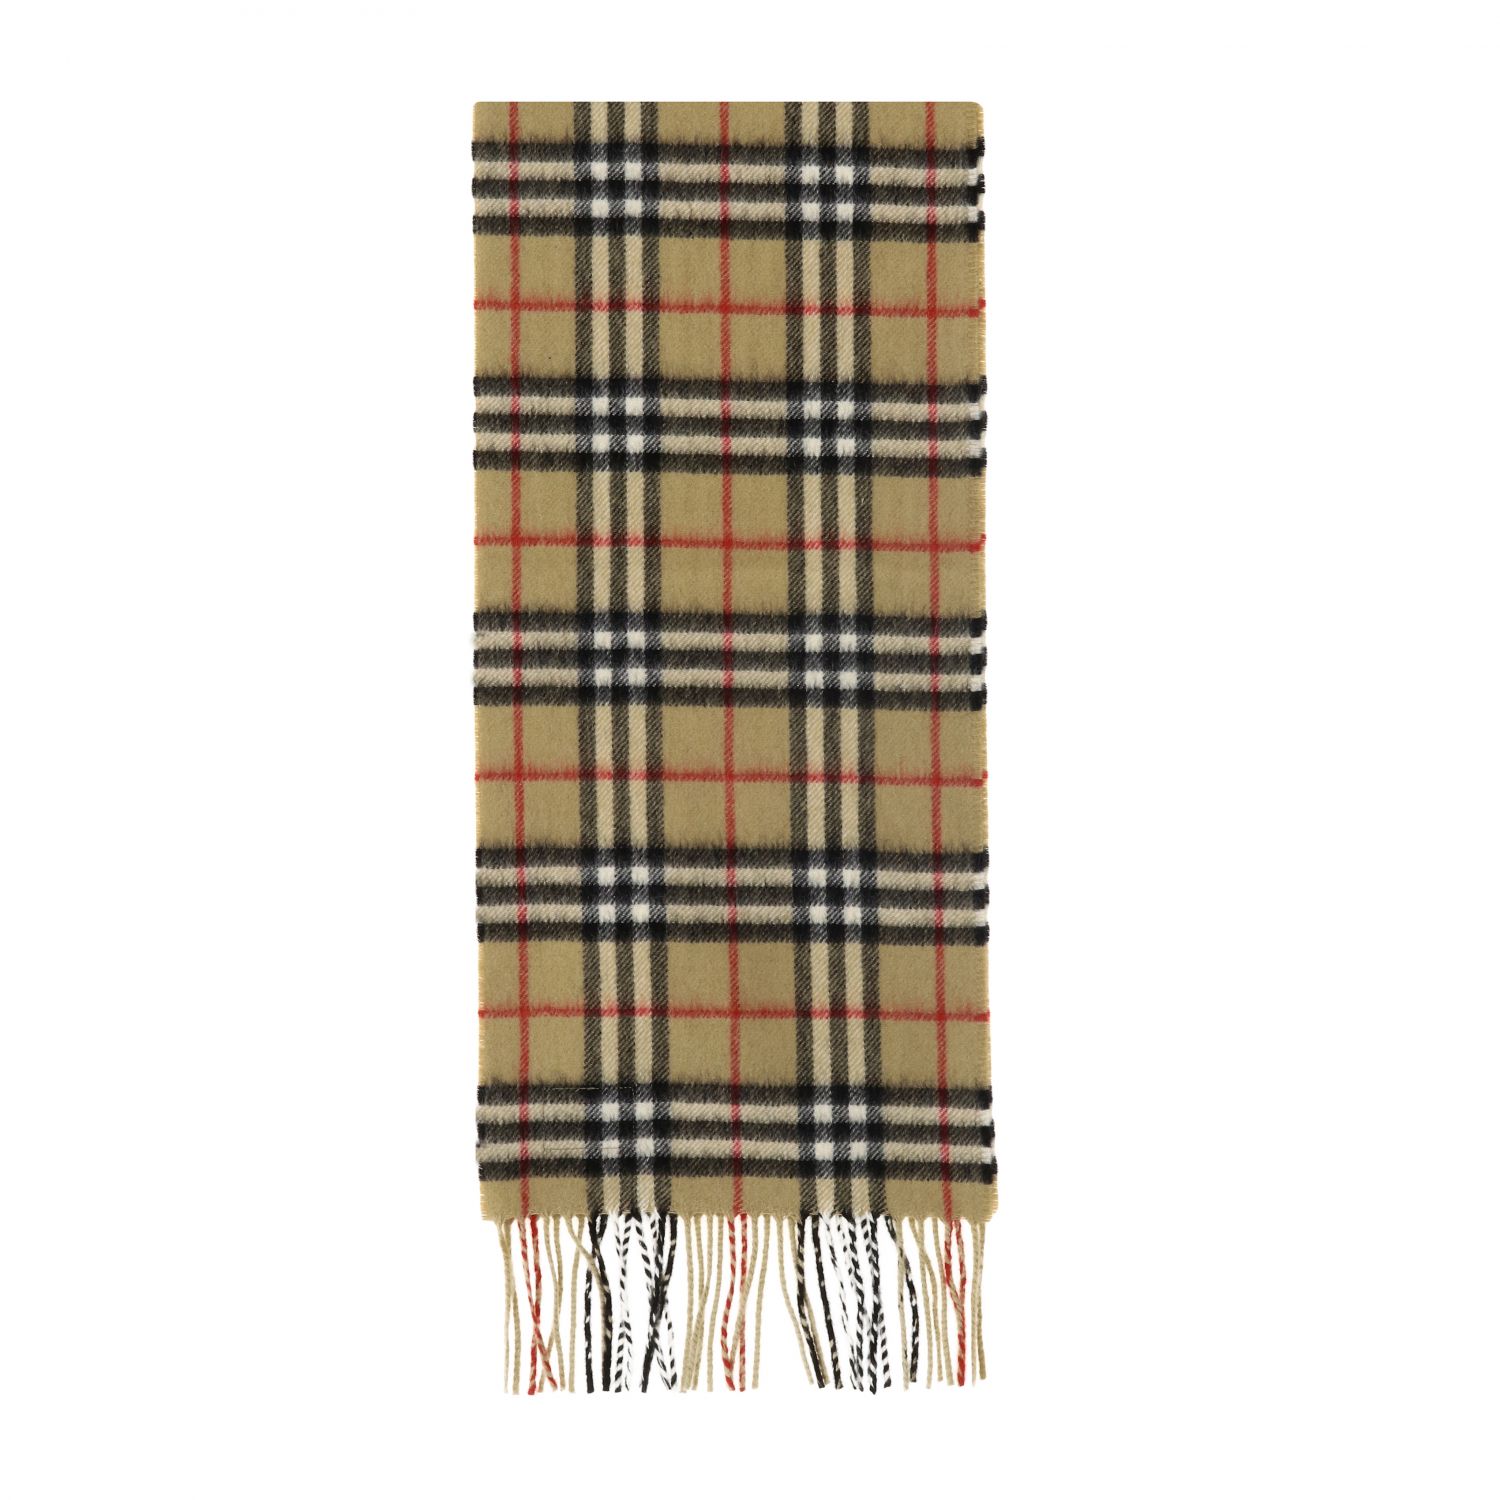 Burberry Outlet: scarf for kids - Beige | Burberry scarf 8015162 111197 ...